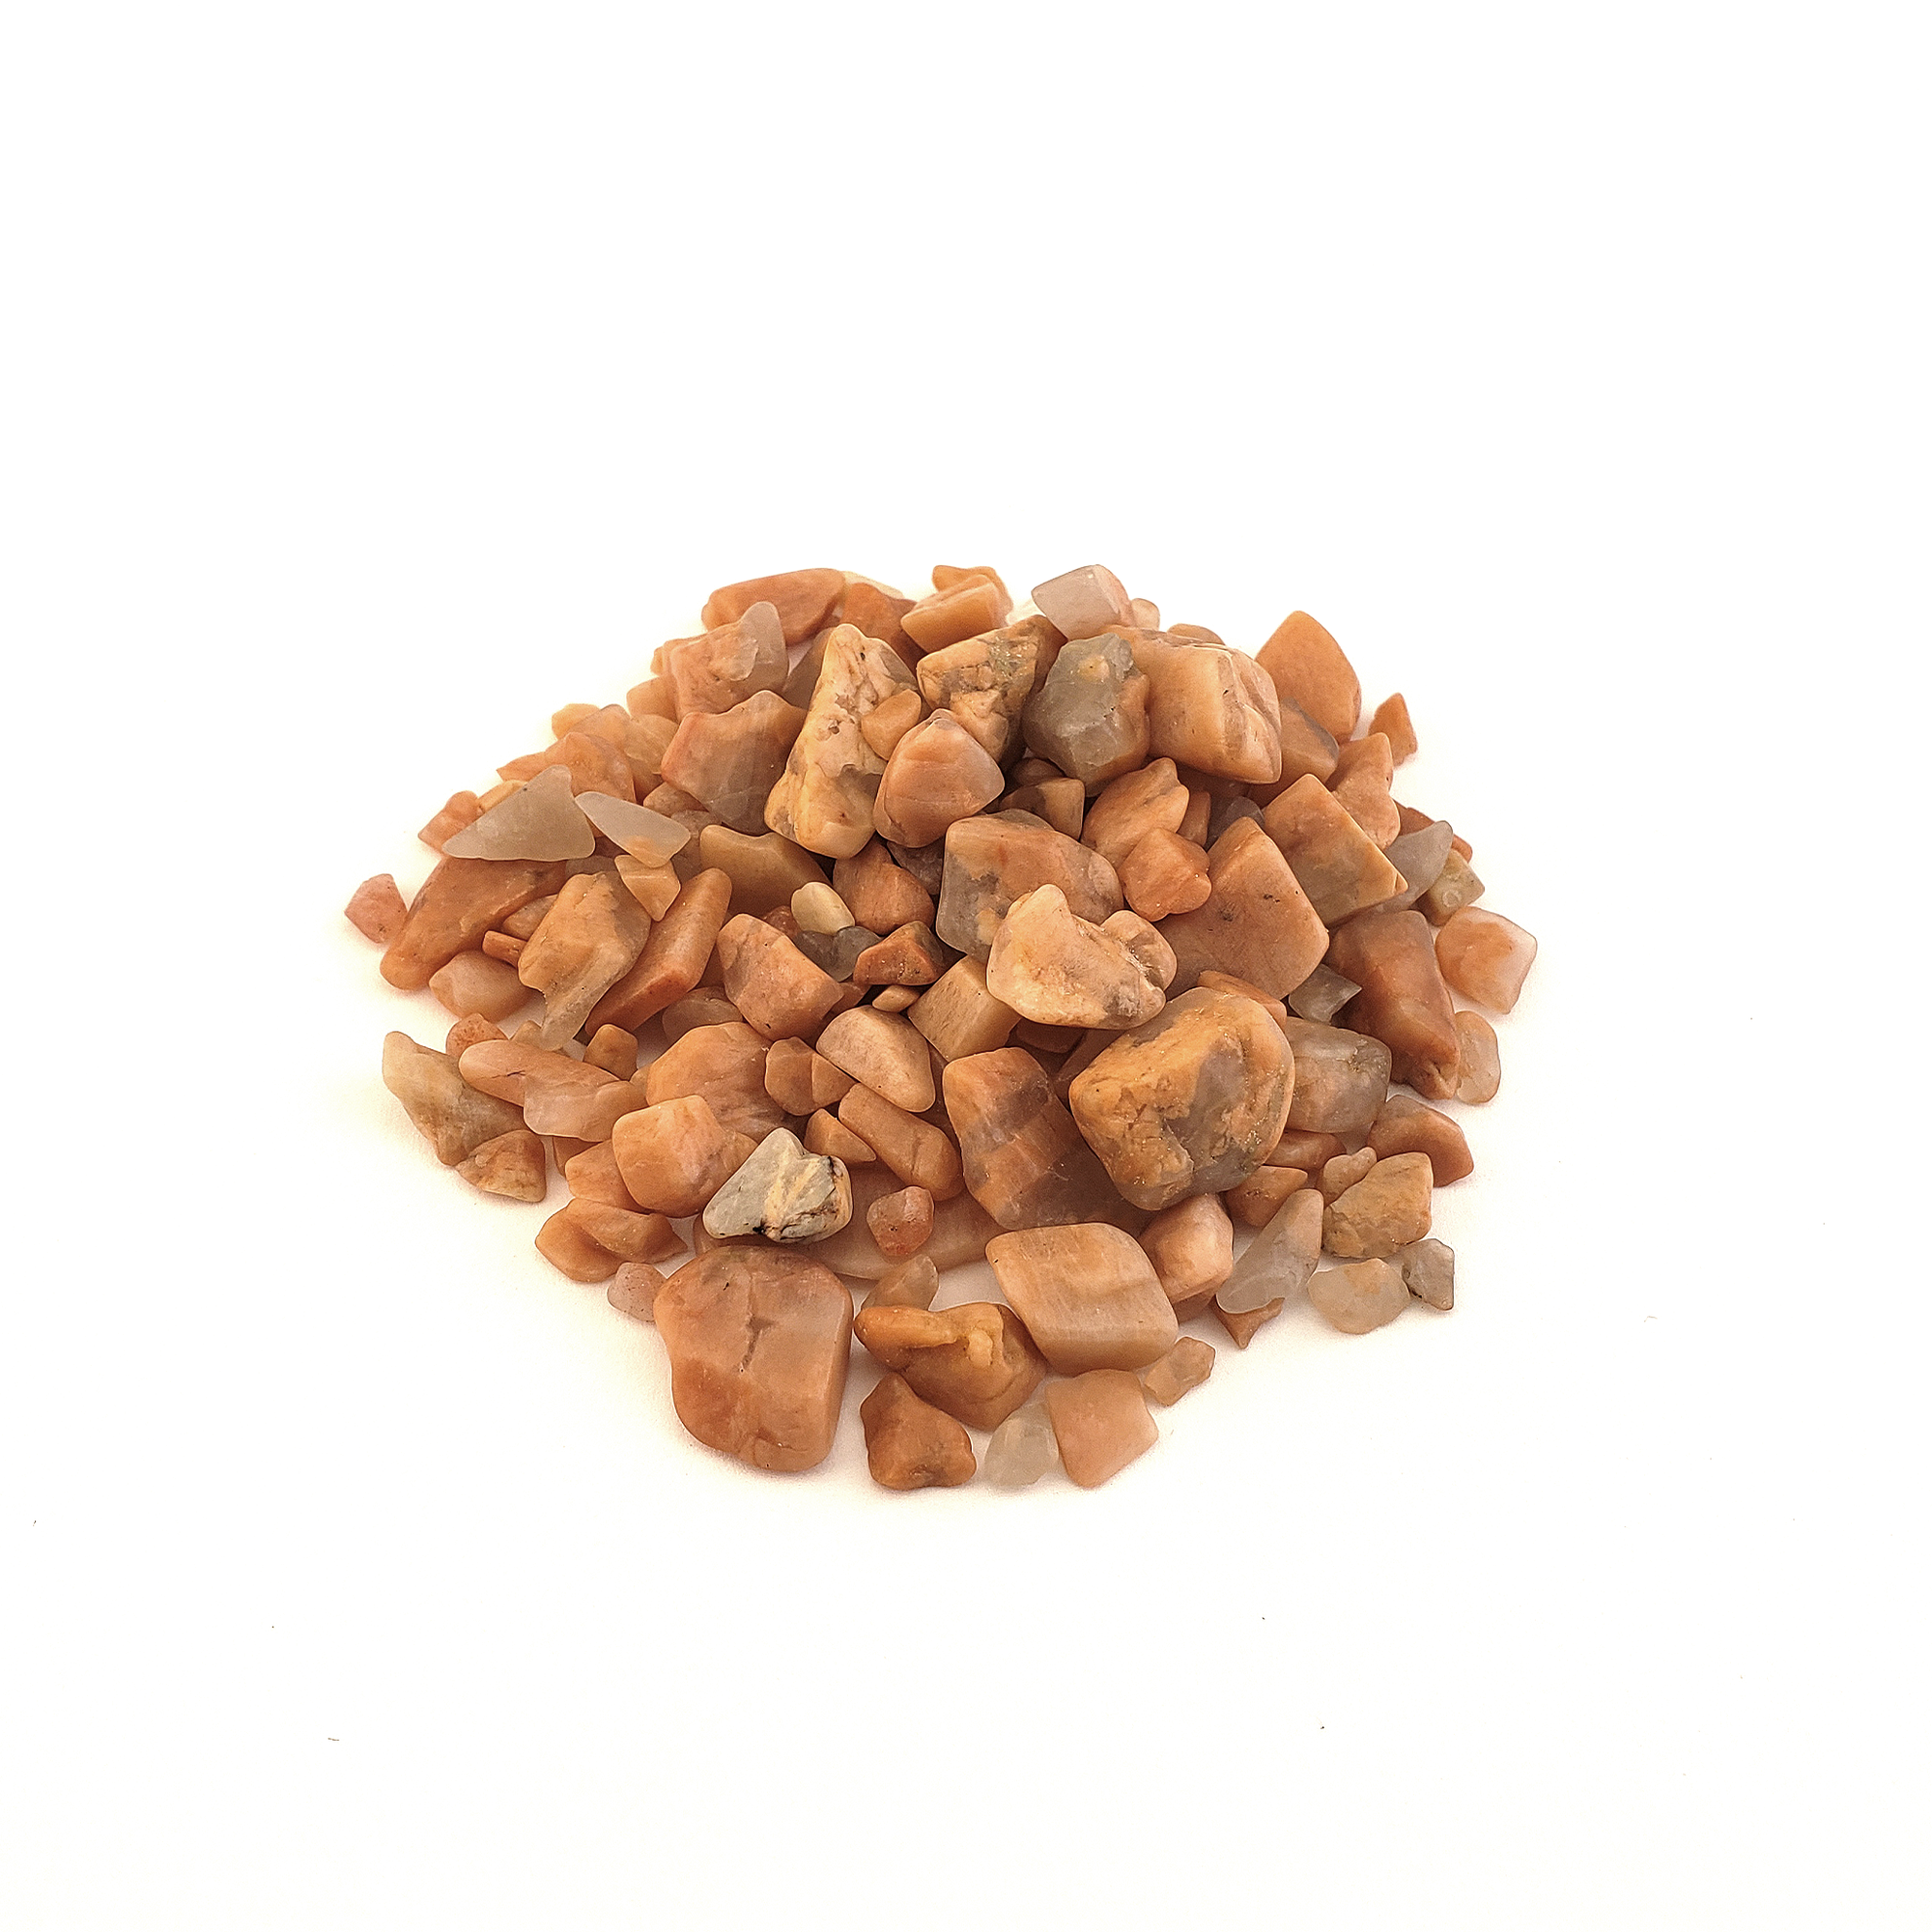 Zebradorite &amp; Peach Moonstone Crystal Chips By the Ounce - On White Background